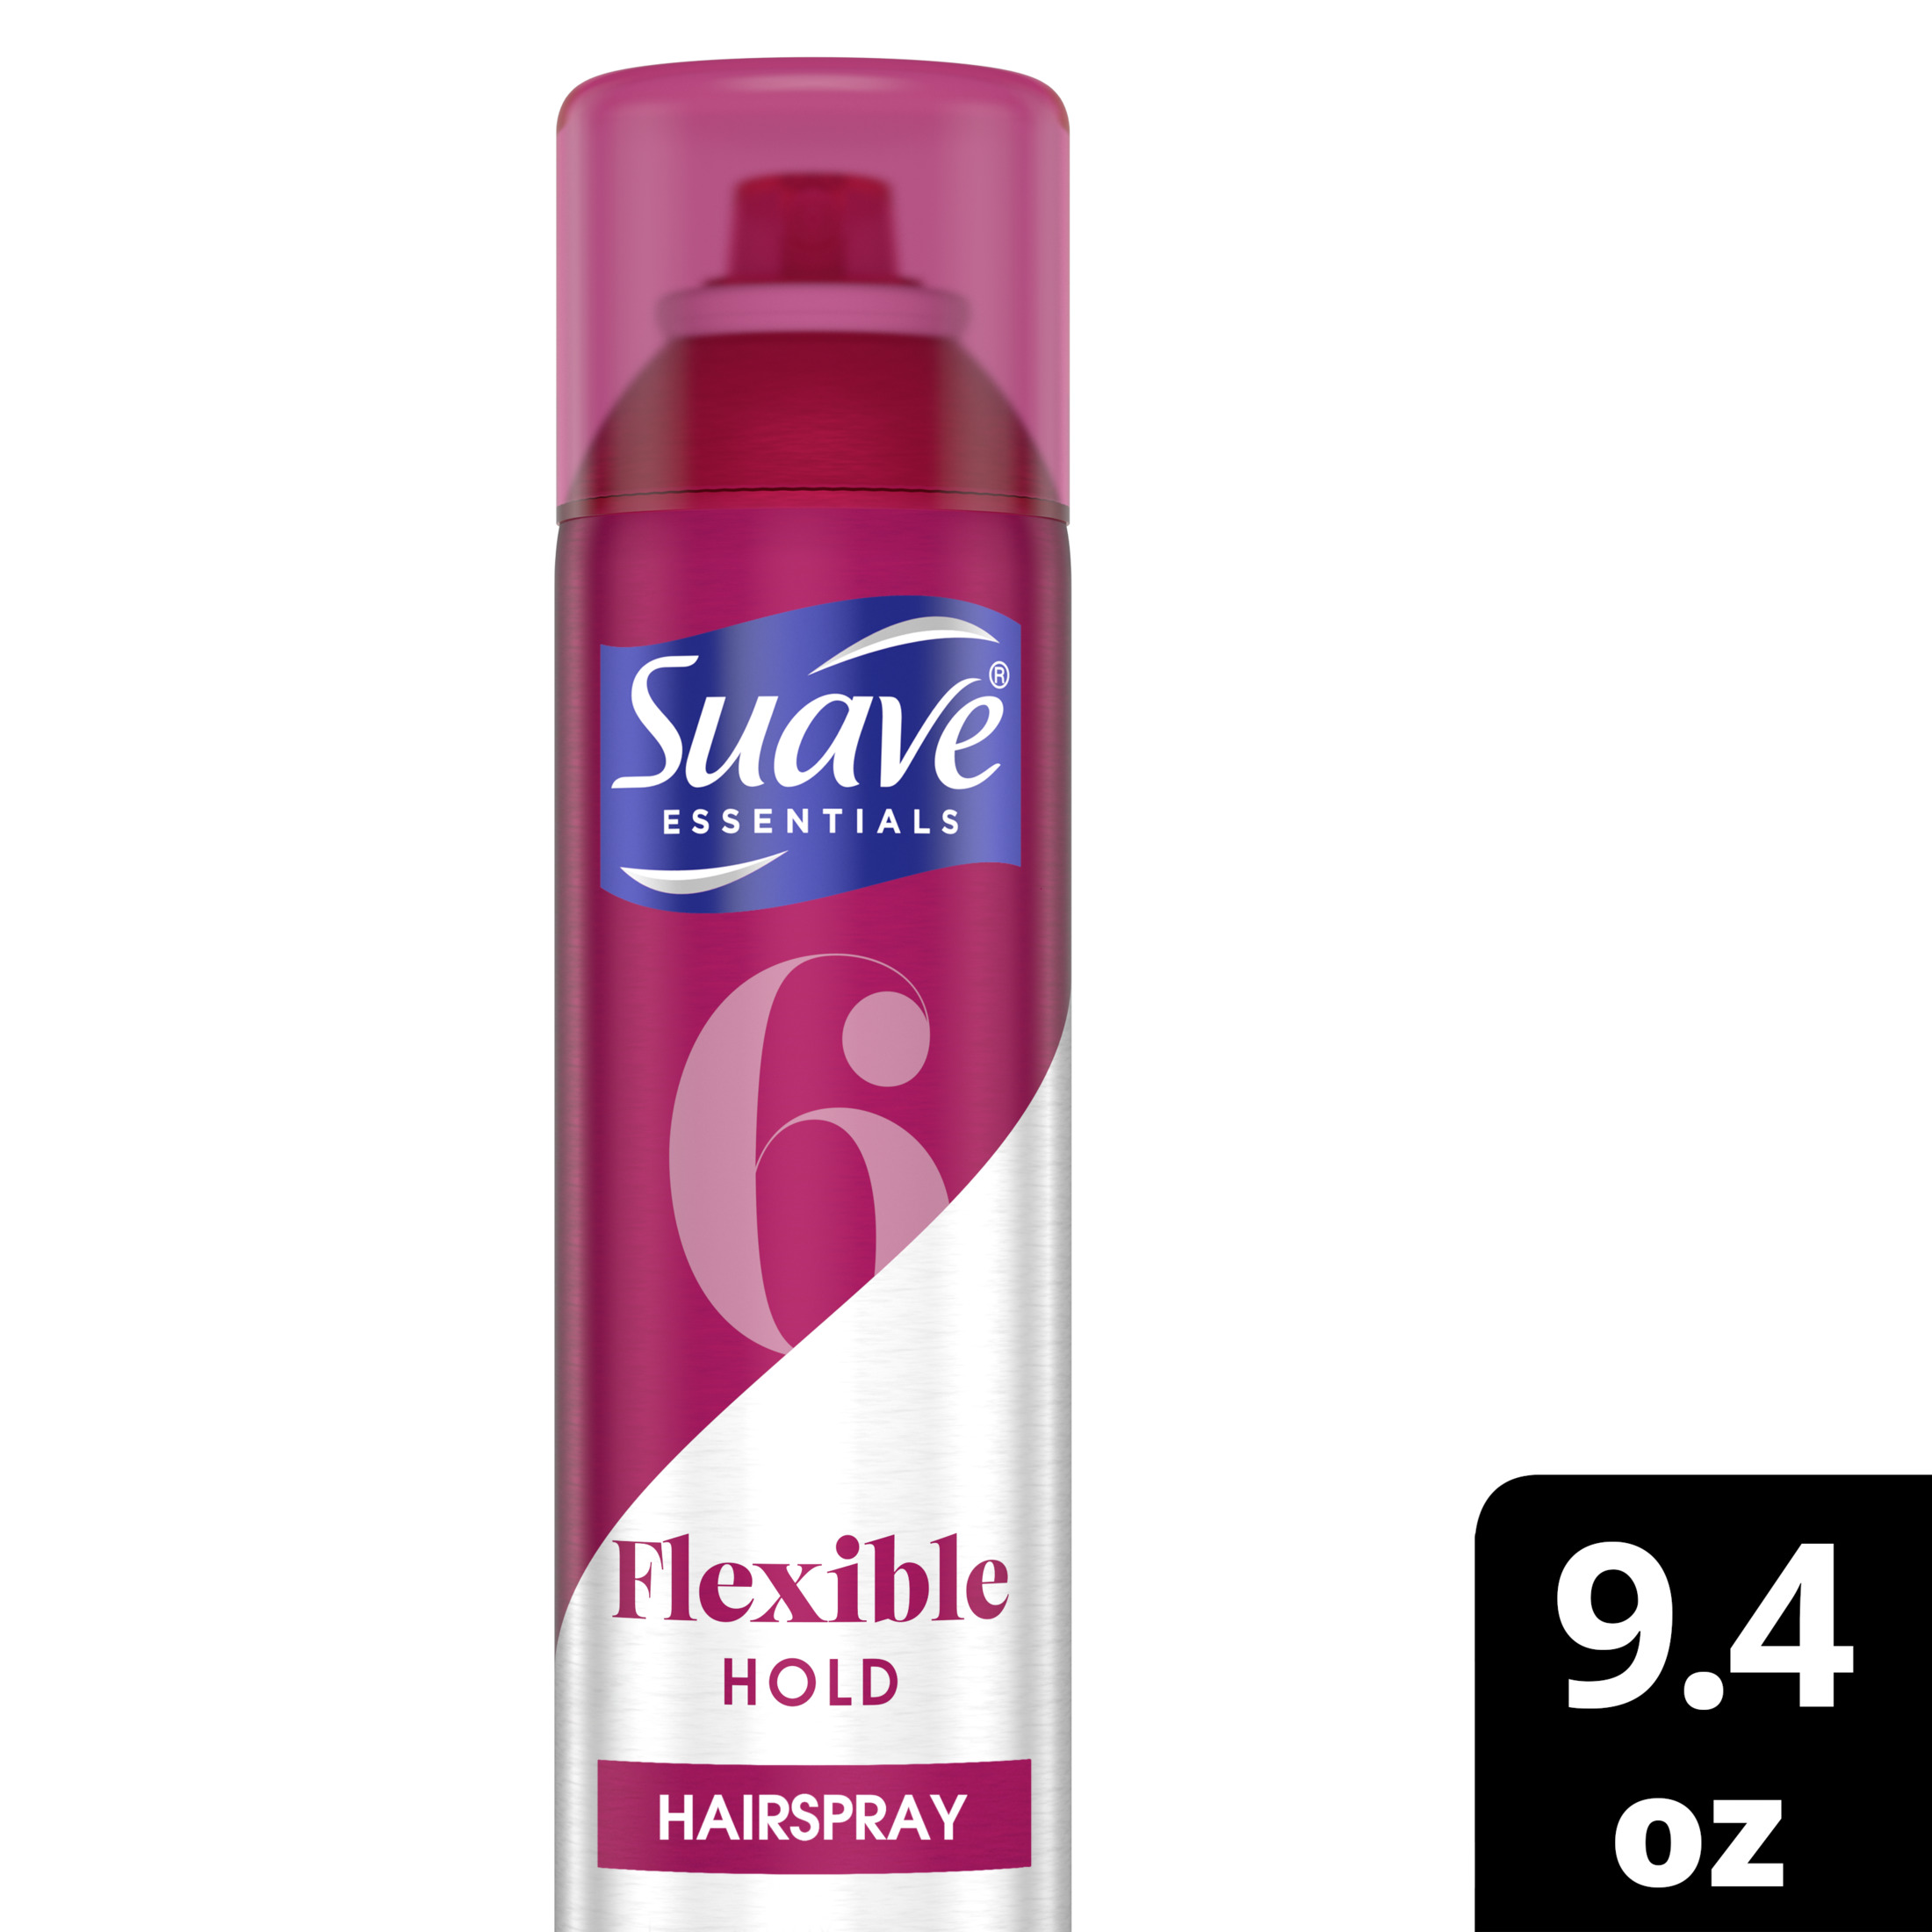 Suave Flexible Hold Hair Spray, 9.4 oz - image 1 of 9